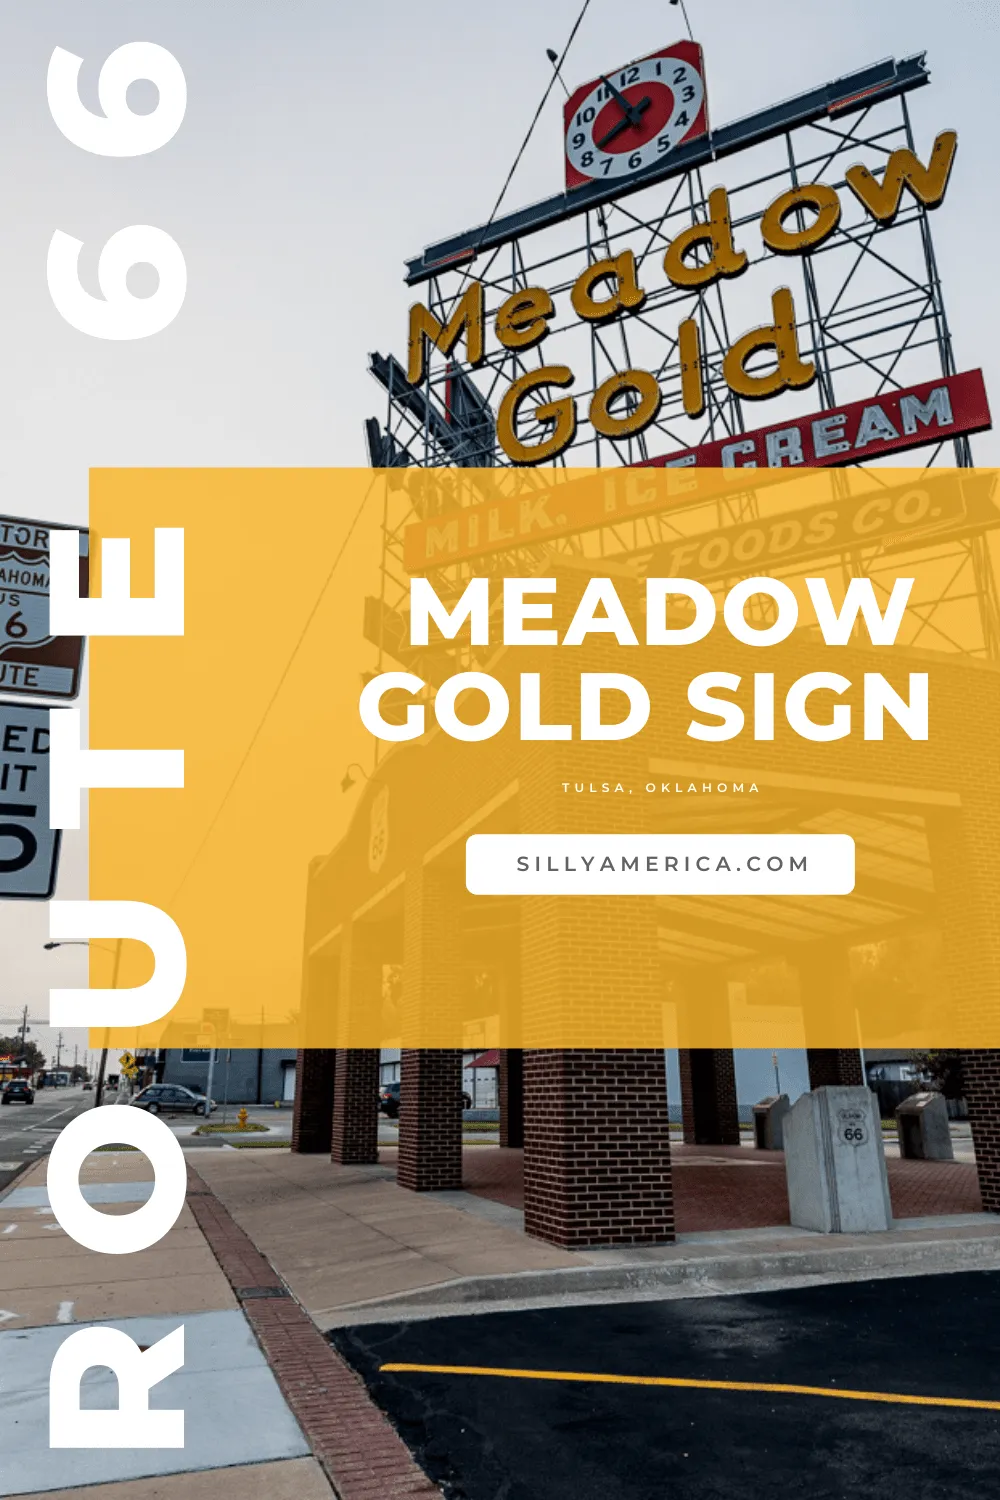 Bright neon lights are a signature sight on Route 66. When you think of neon you probably think of motels and service stations. But do you also think of milk? You should, because the Meadow Gold Sign in Tulsa, Oklahoma is a Route 66 landmark. Add this roadside attraction to your travel bucket list.  #RoadTrips #RoadTripStop #Route66 #Route66RoadTrip #OklahomaRoute66 #Oklahoma #OklahomaRoadTrip #OklahomaRoadsideAttractions #RoadsideAttractions #RoadsideAttraction #RoadsideAmerica #RoadTrip